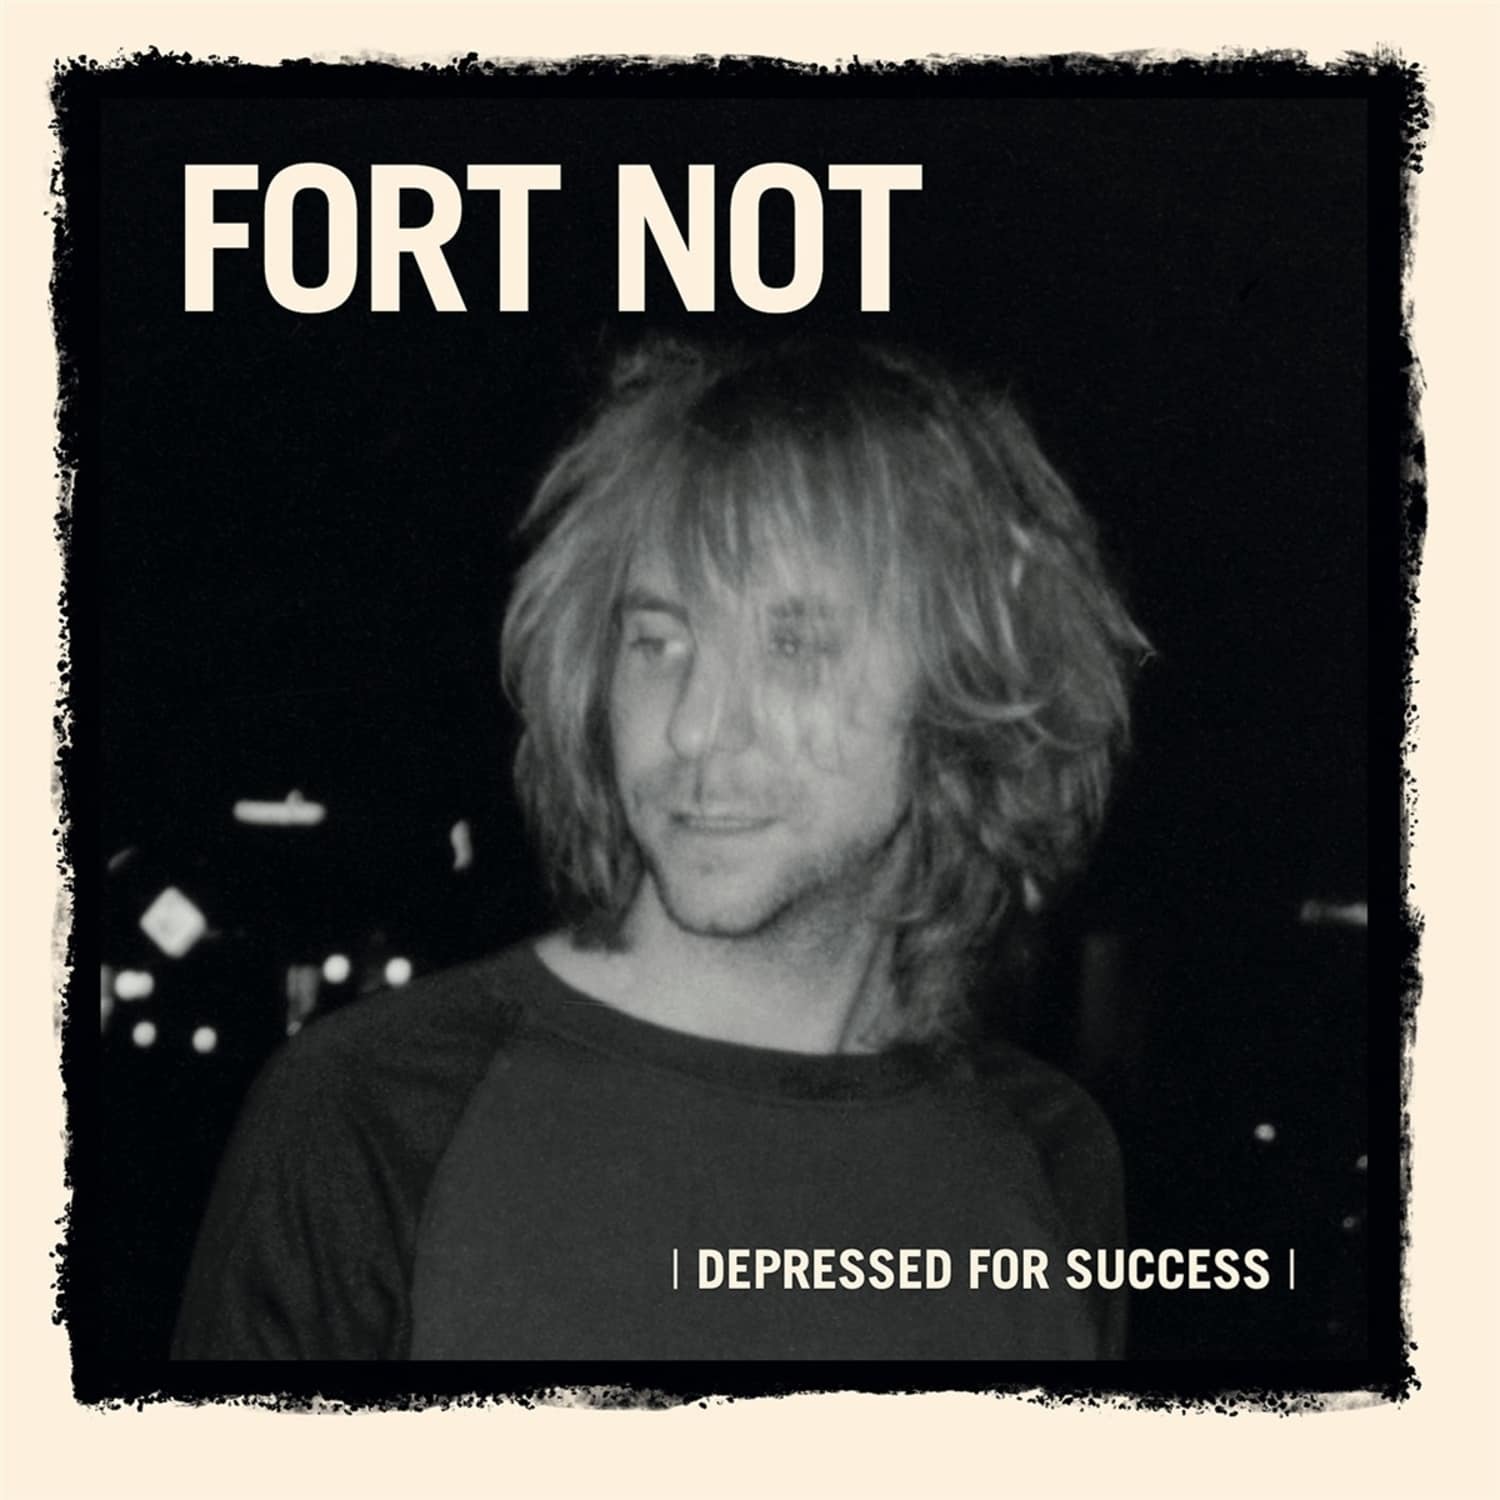 Fort not - DEPRESSED FOR SUCCESS 